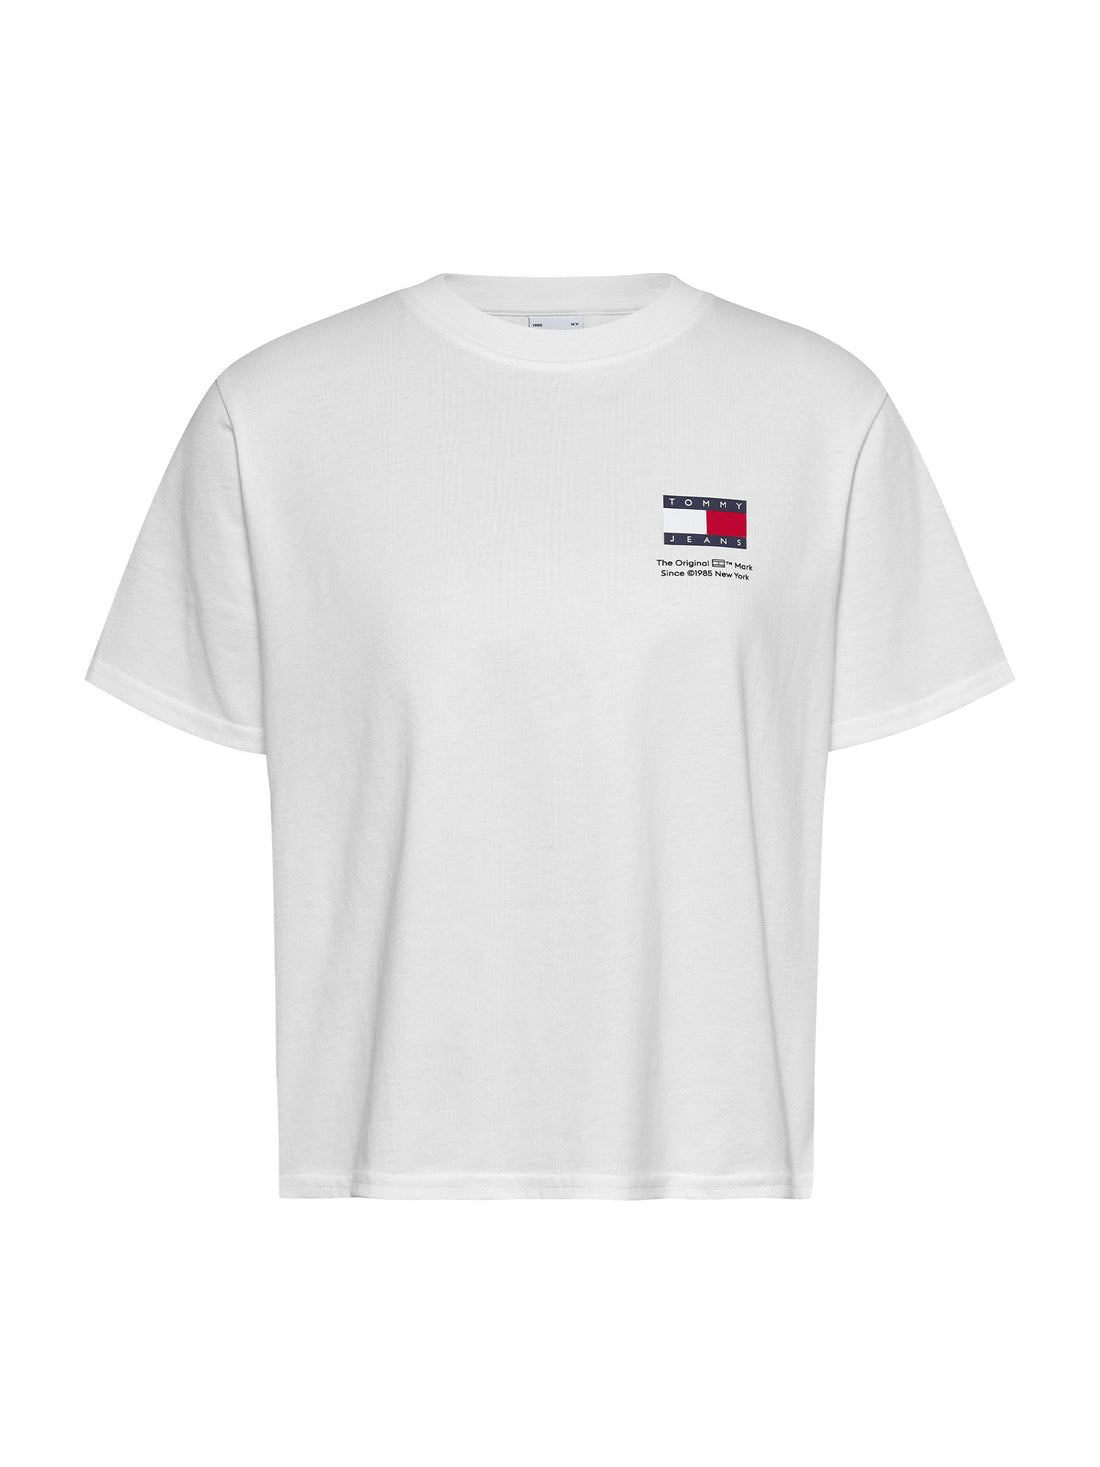 T-shirt Bianco Tommy Jeans